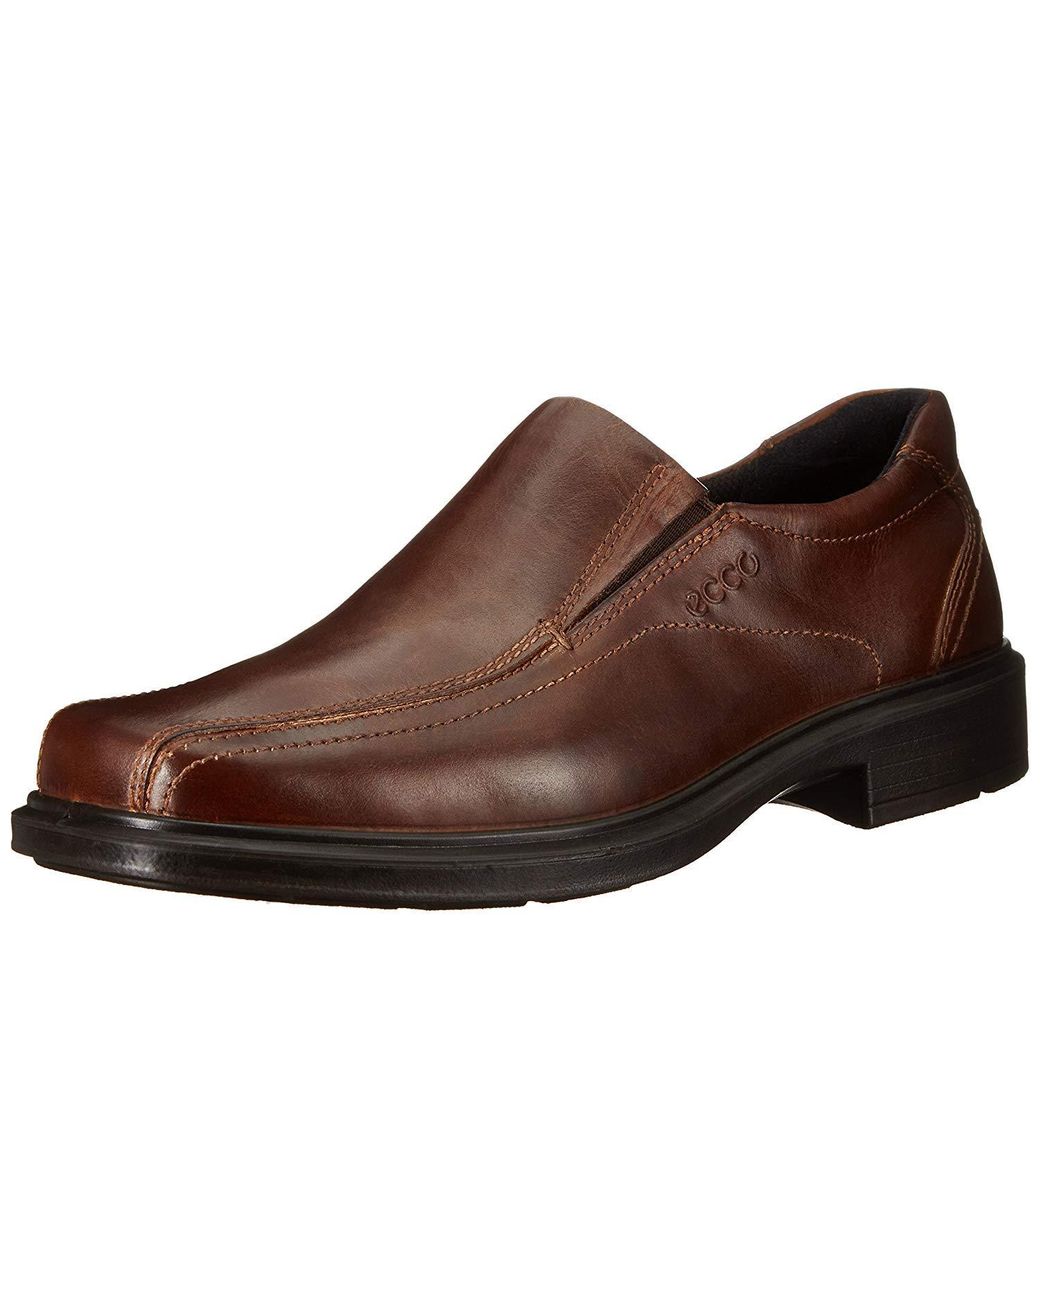 Ecco Leather Helsinki Slip On in Cocoa Brown (Brown) for Men - Save 77% |  Lyst